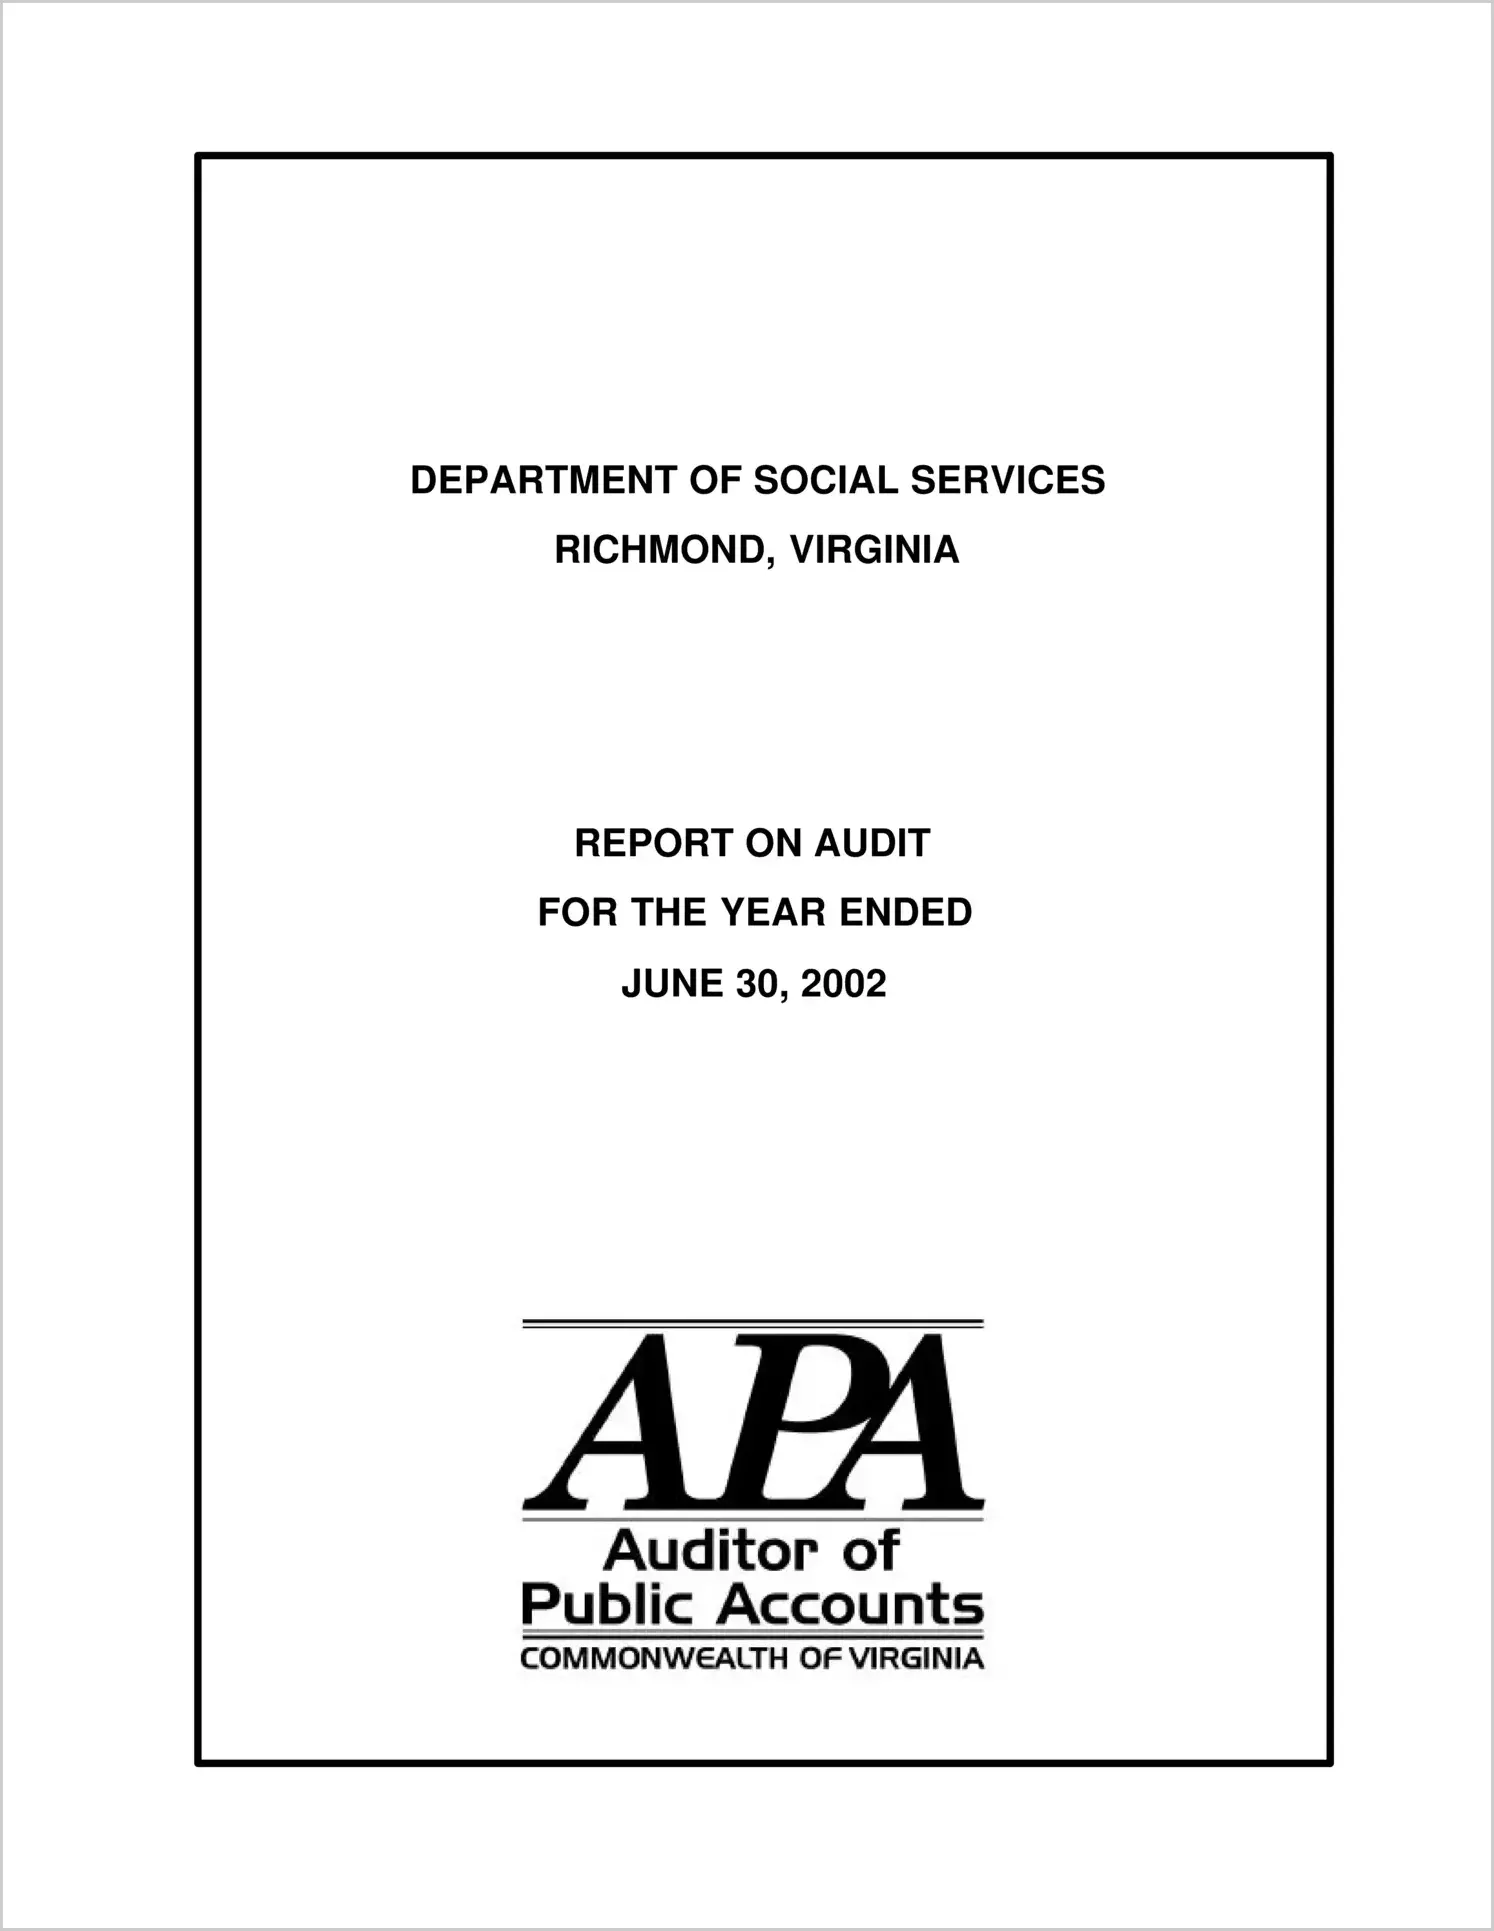 Department of Social Services for the year ended June 30, 2002